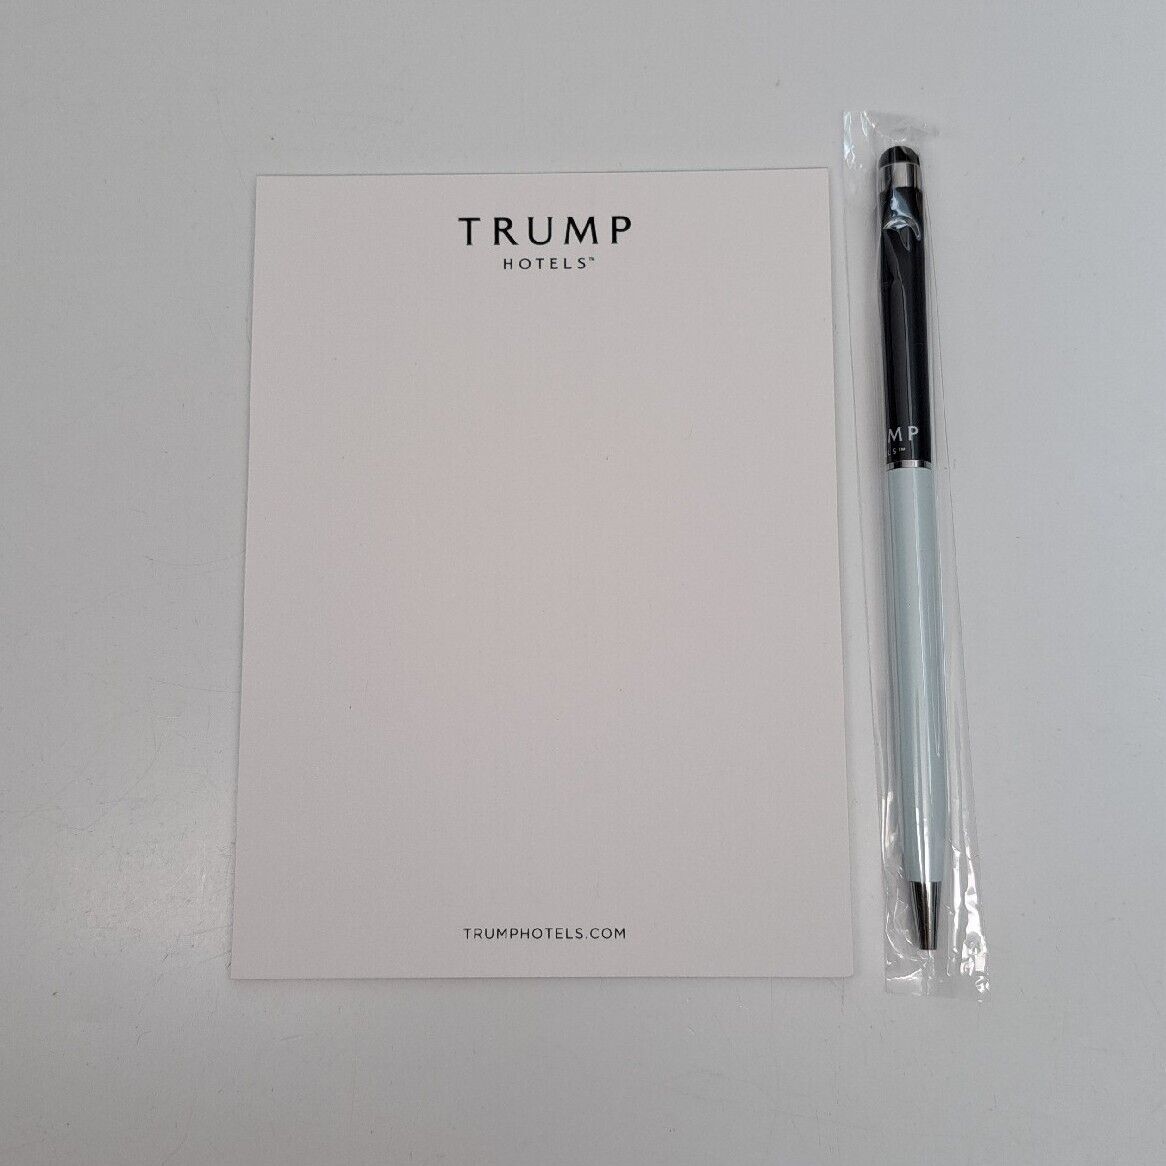 Trump Hotels Collectible Notepad & Stylus Pen Stationery Set RARE Retired Design